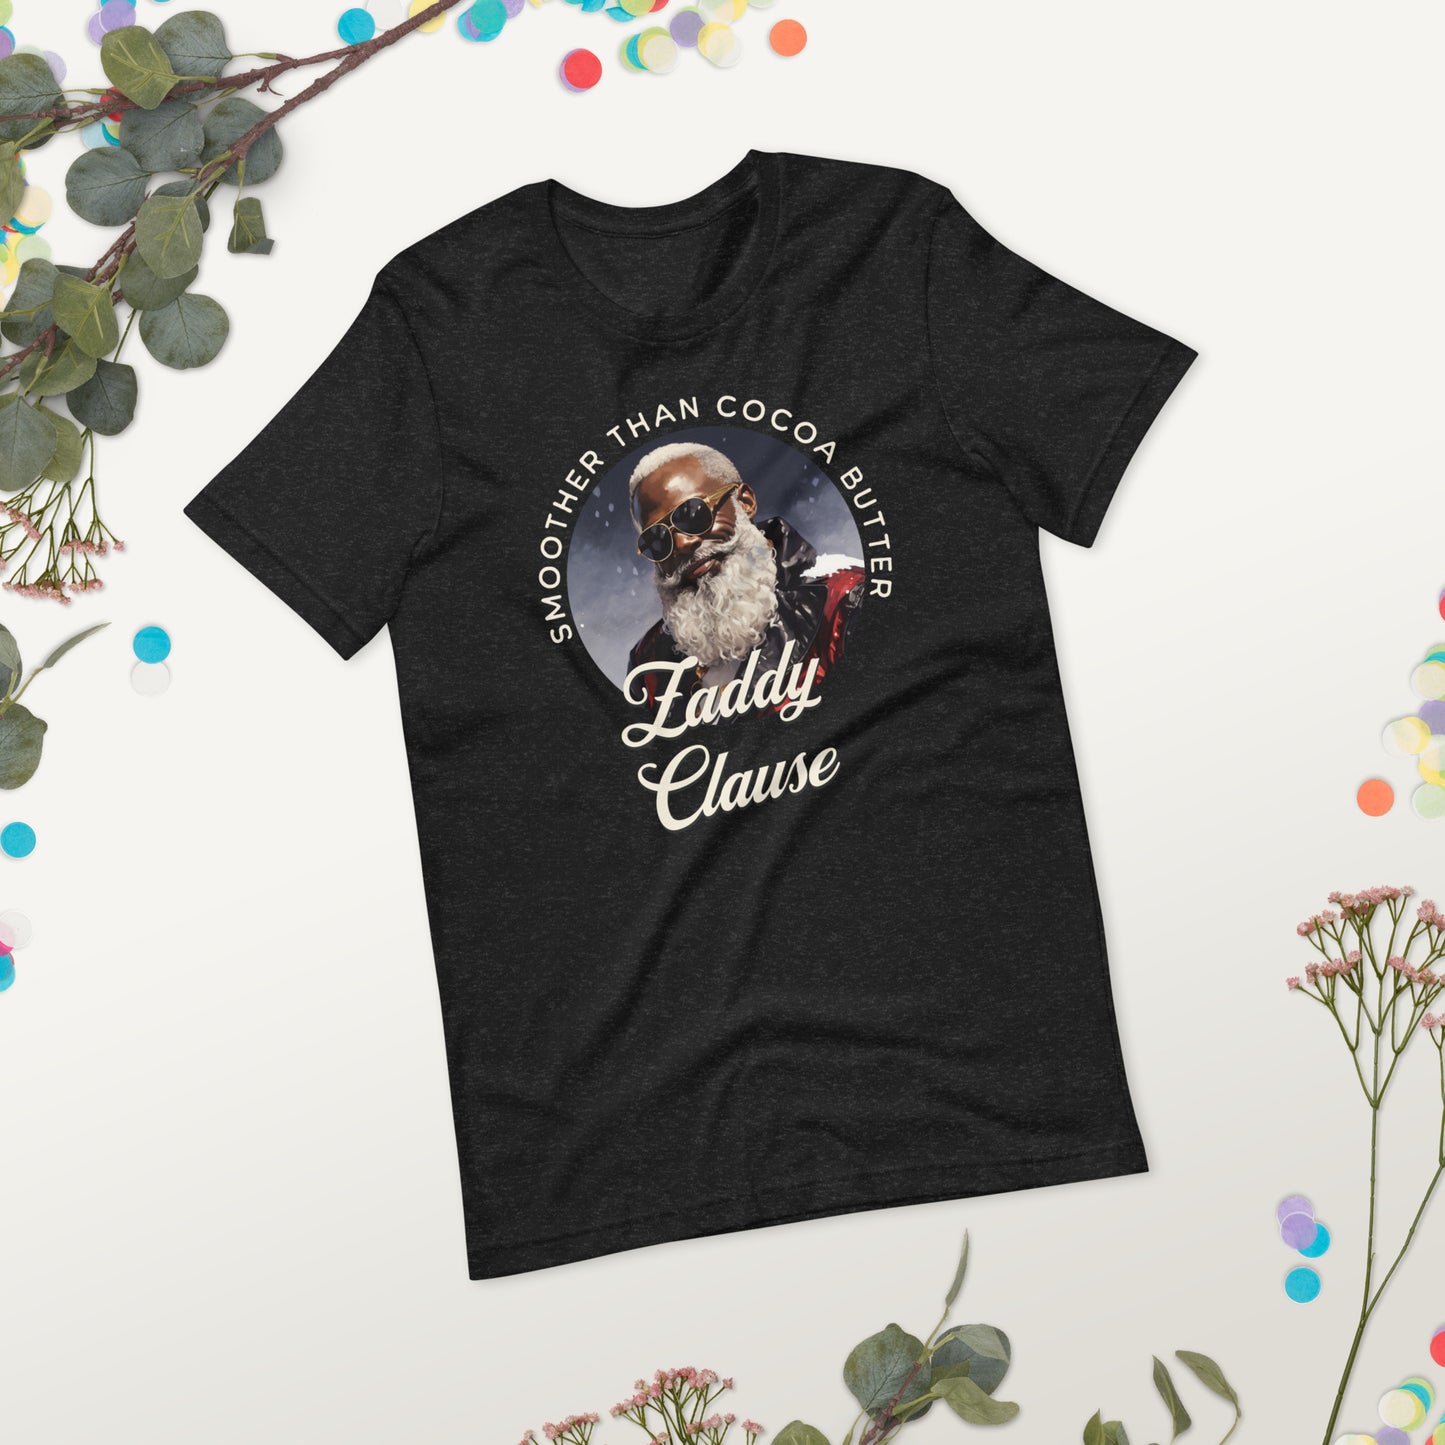 Zaddy Clause Funny Christmas T-shirt, Holiday Shirt for gift for him